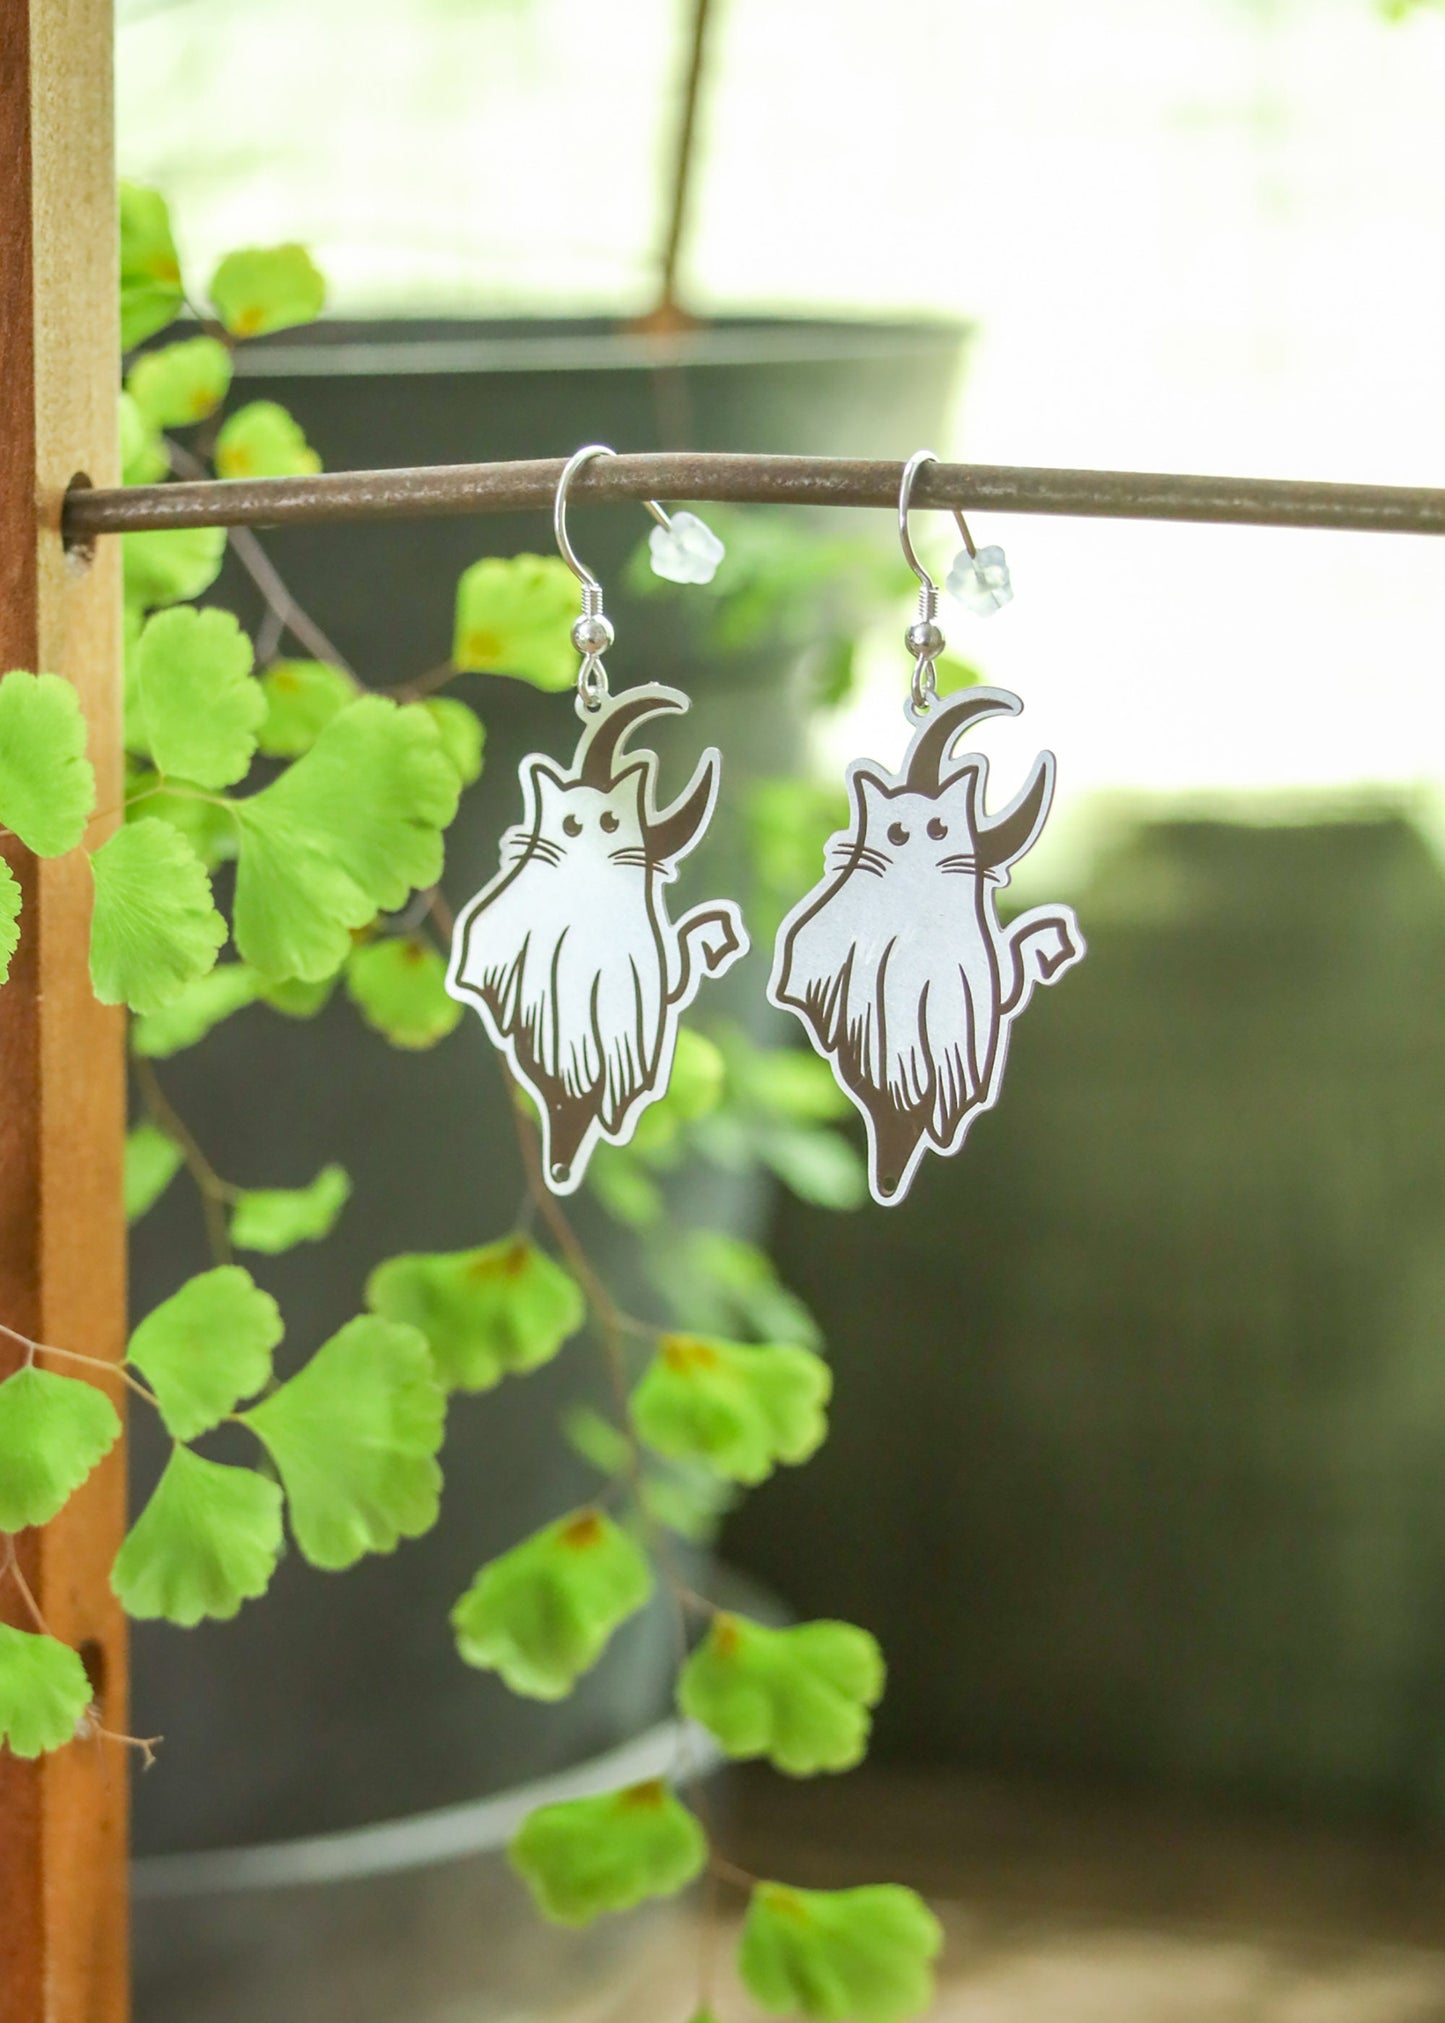 Ghost Cat Earrings | Witchy Halloween Kitty Dangles | Stainless Steel Charm Sterling Silver Ear Wire | Spooky Kawaii Cottagecore Jewelry